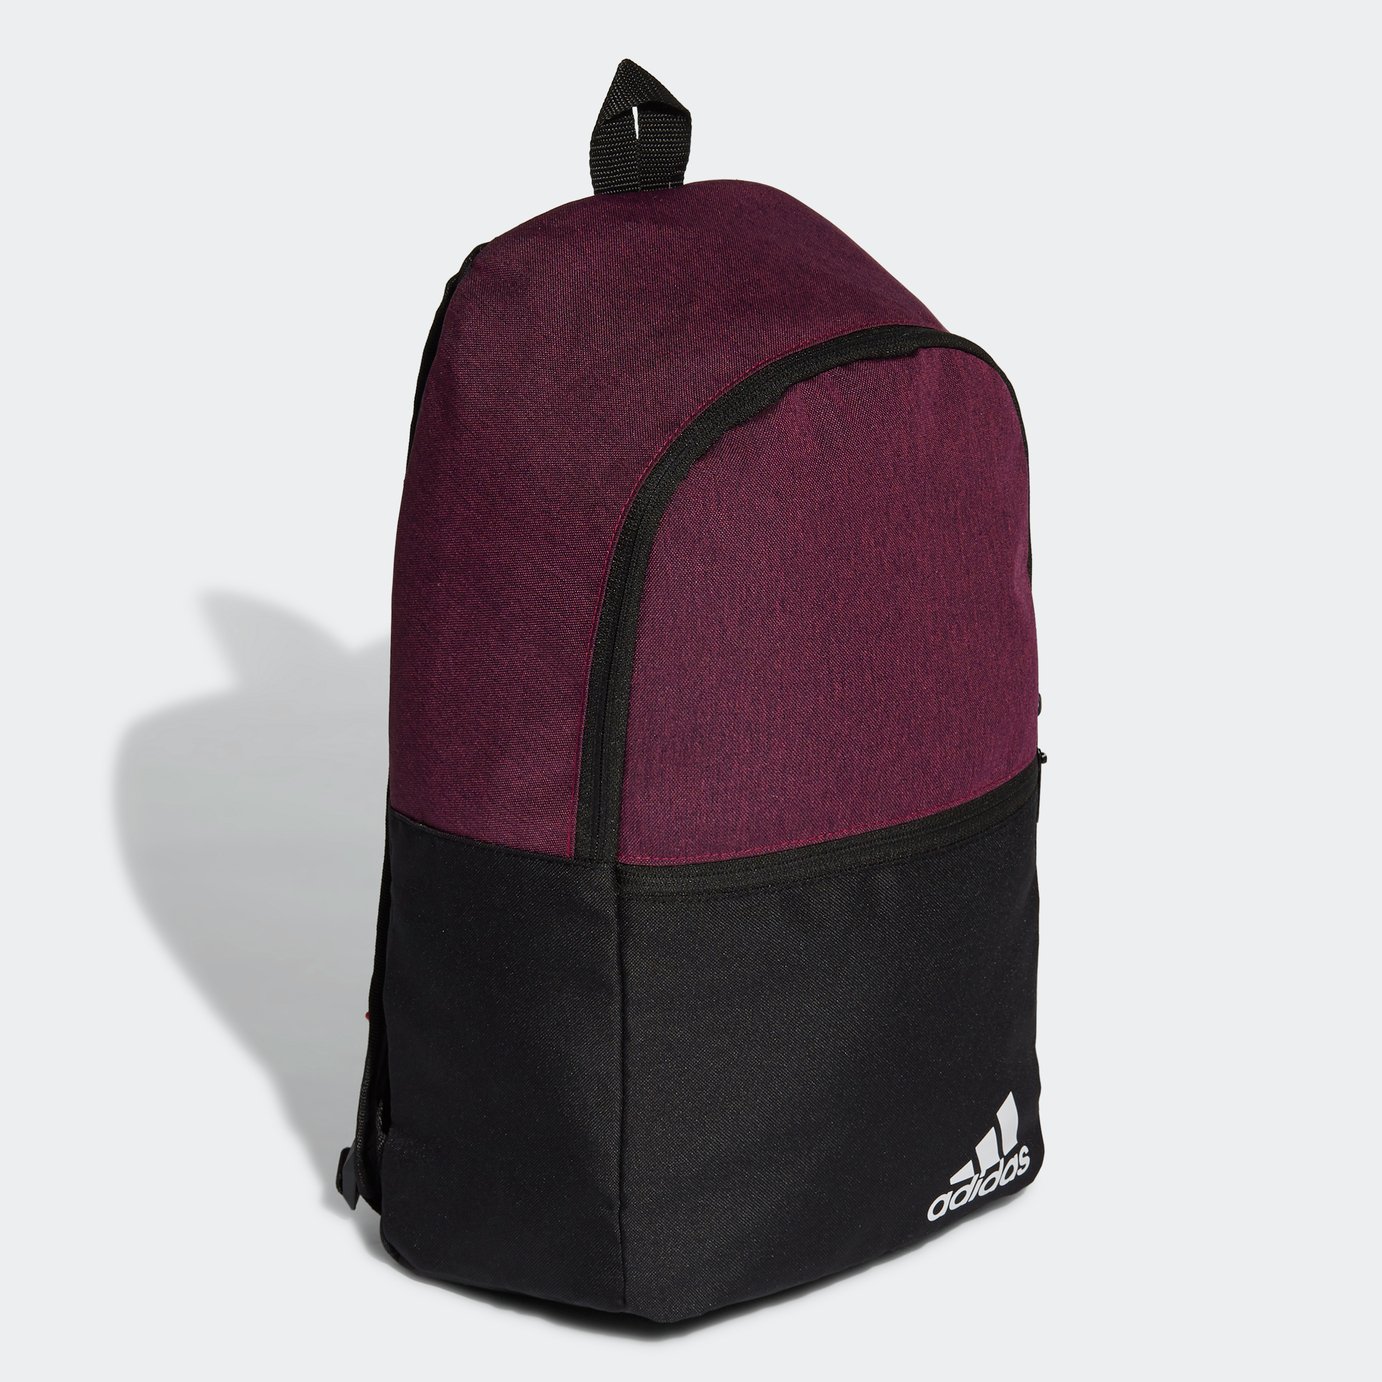 Adidas Daily II 20L Backpack Review